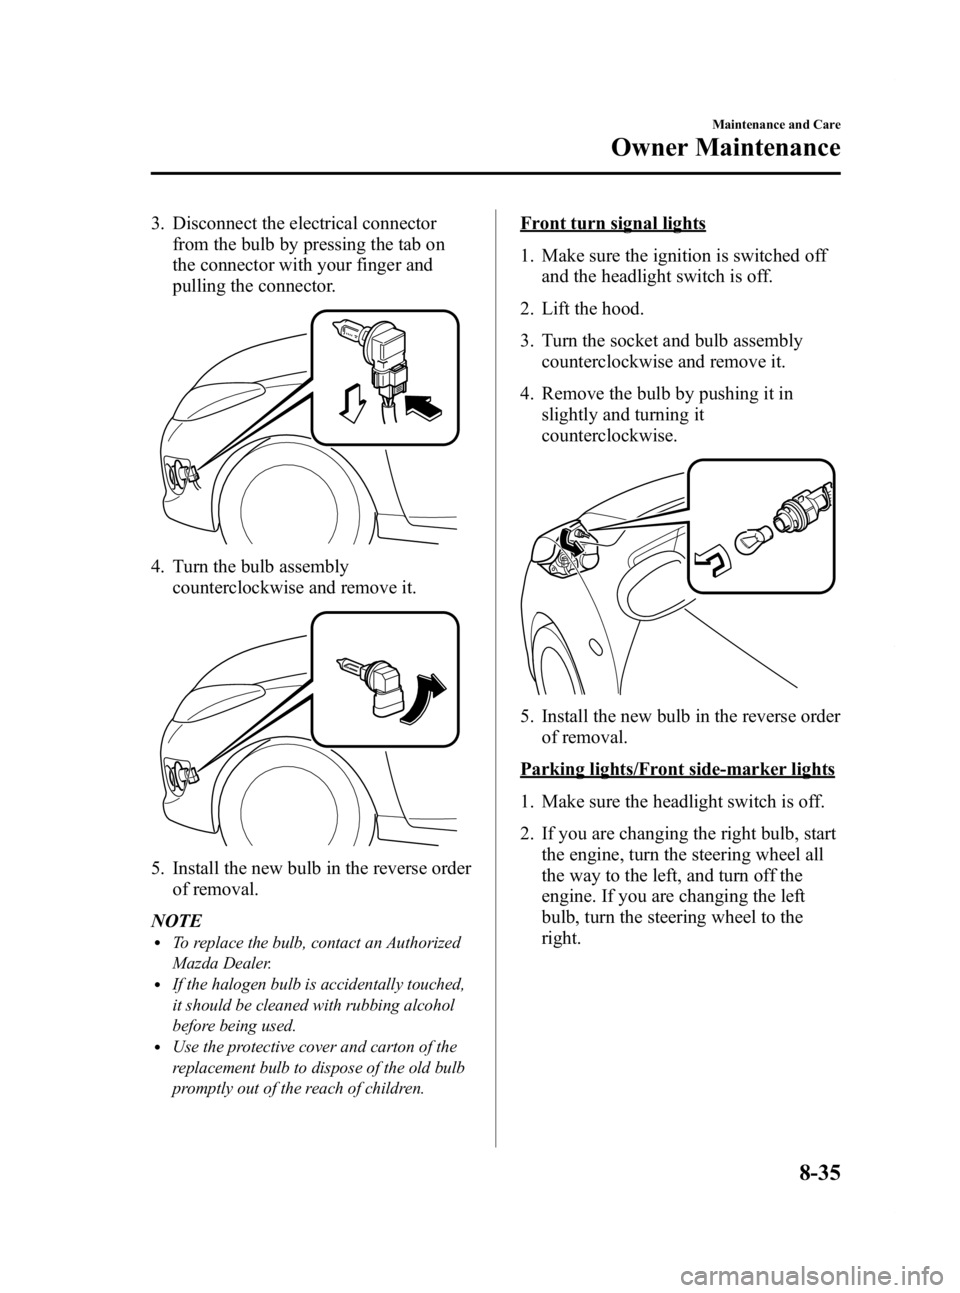 MAZDA MODEL 2 2012  Owners Manual Black plate (269,1)
3. Disconnect the electrical connectorfrom the bulb by pressing the tab on
the connector with your finger and
pulling the connector.
4. Turn the bulb assemblycounterclockwise and r